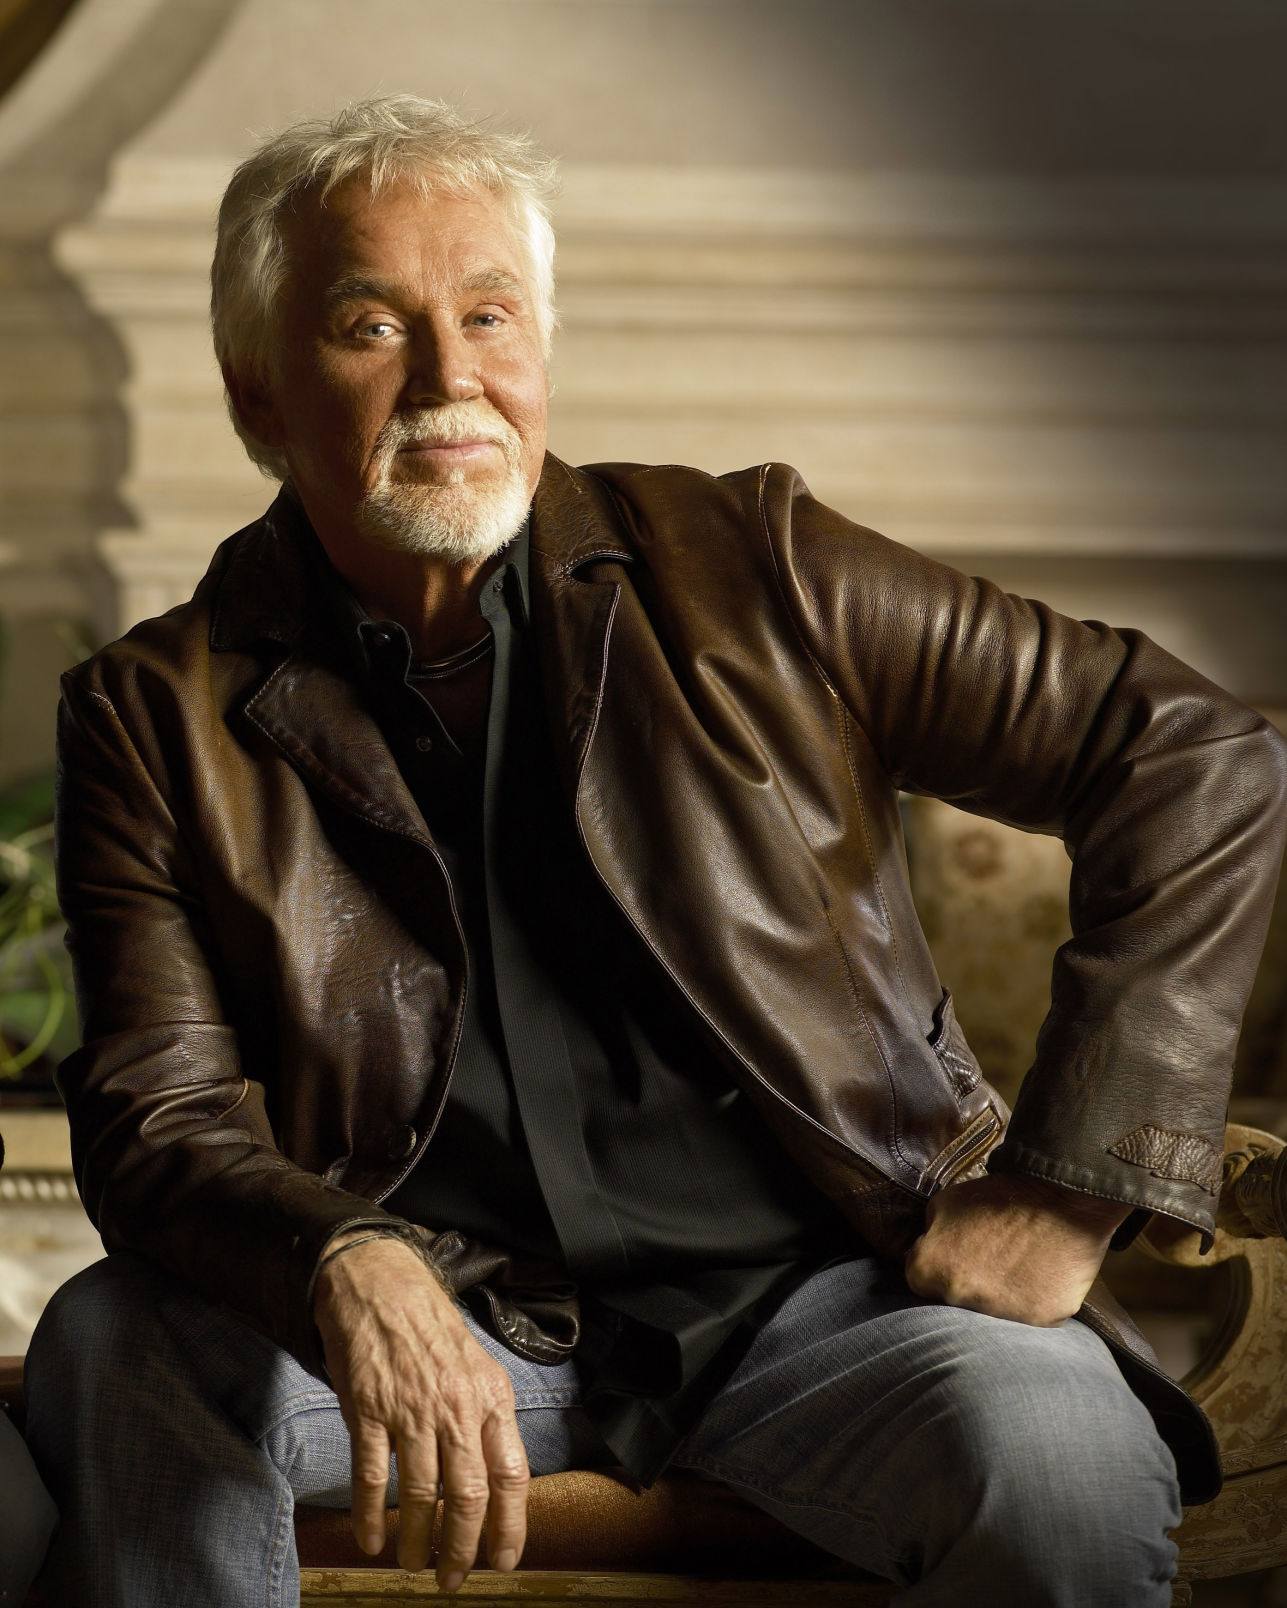 kenny rogers through the years a retrospective